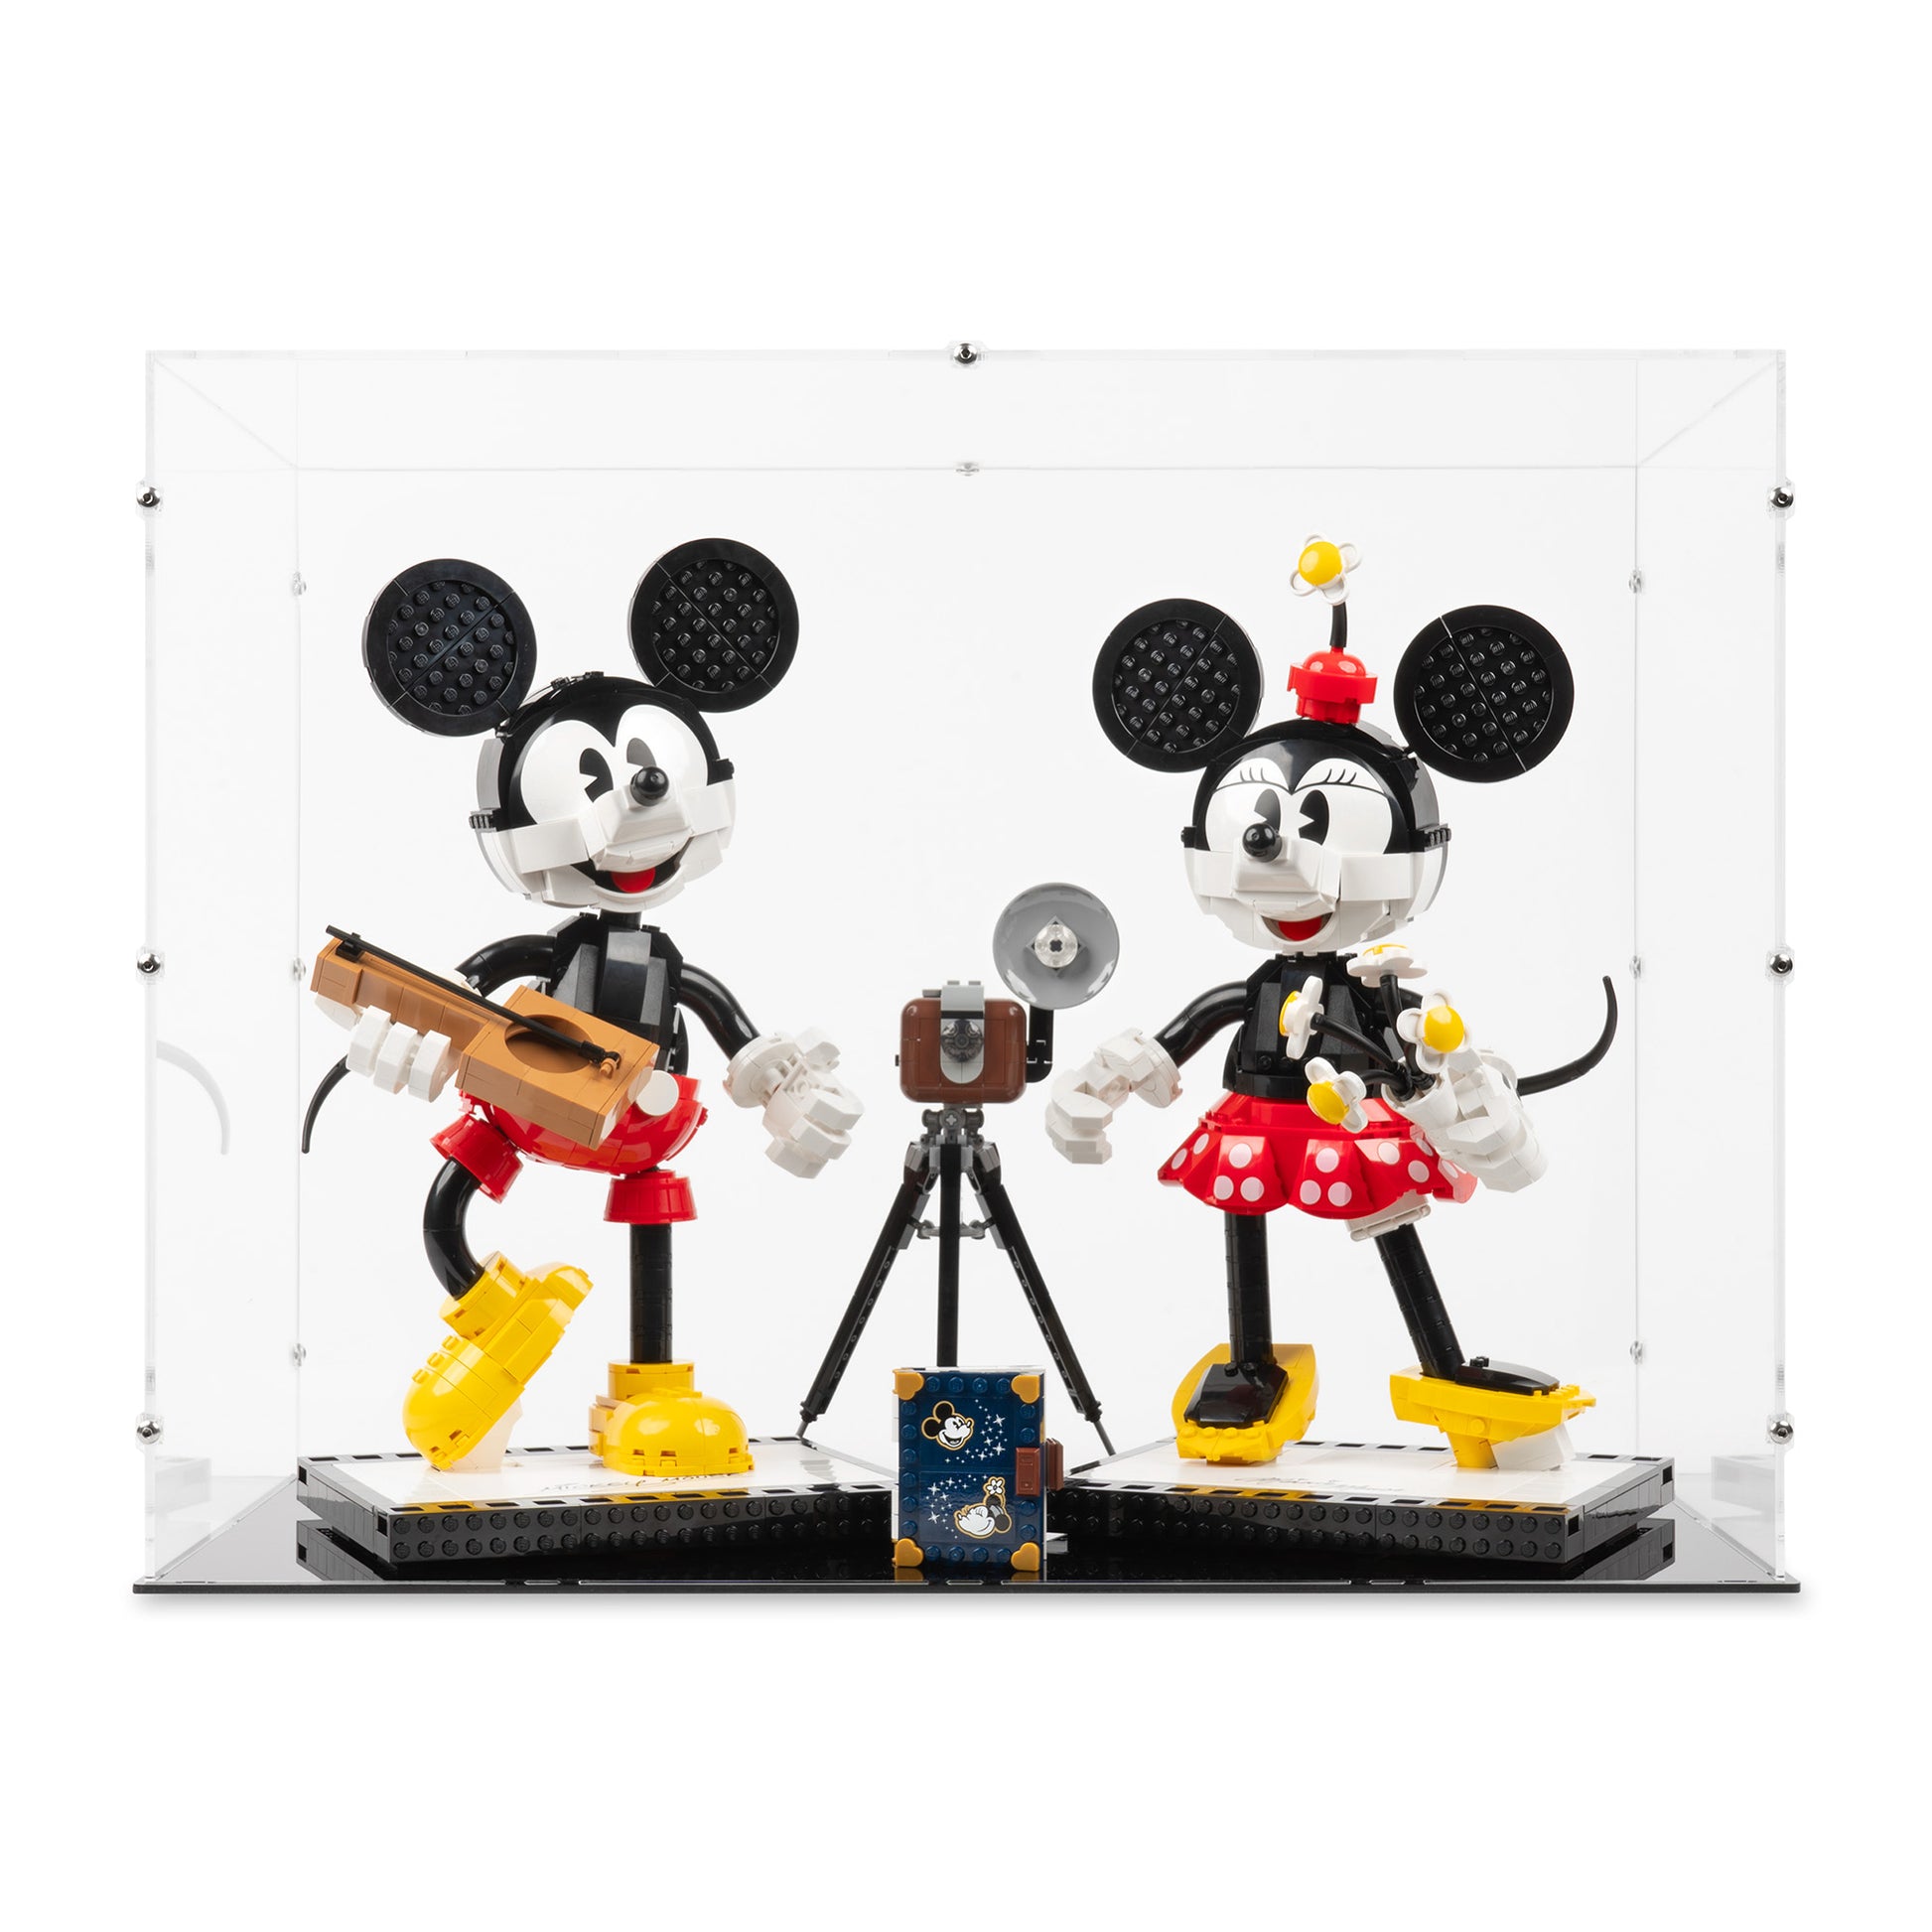 Front view of LEGO 43179 Mickey Mouse and Minnie Mouse Display Case.